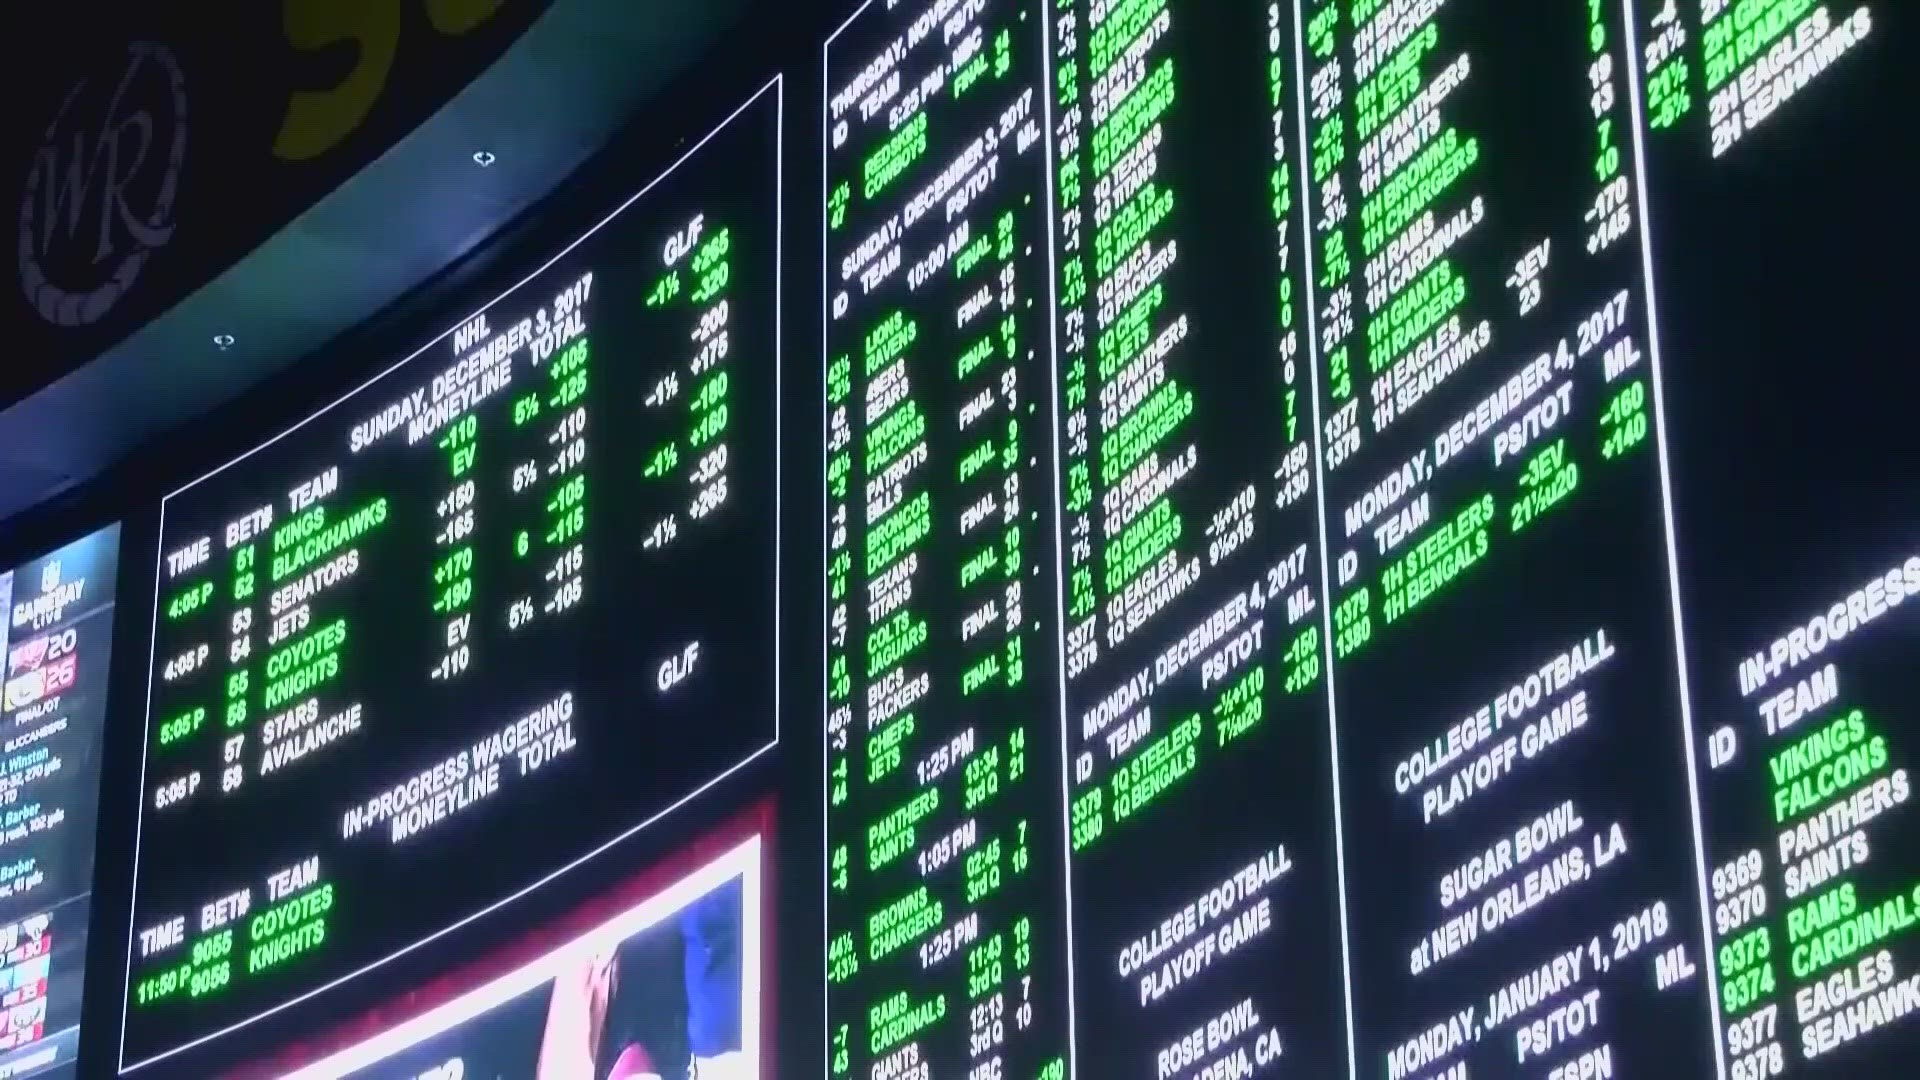 The Ohio Casino Control Commission approved new wagering opportunities in its catalog.